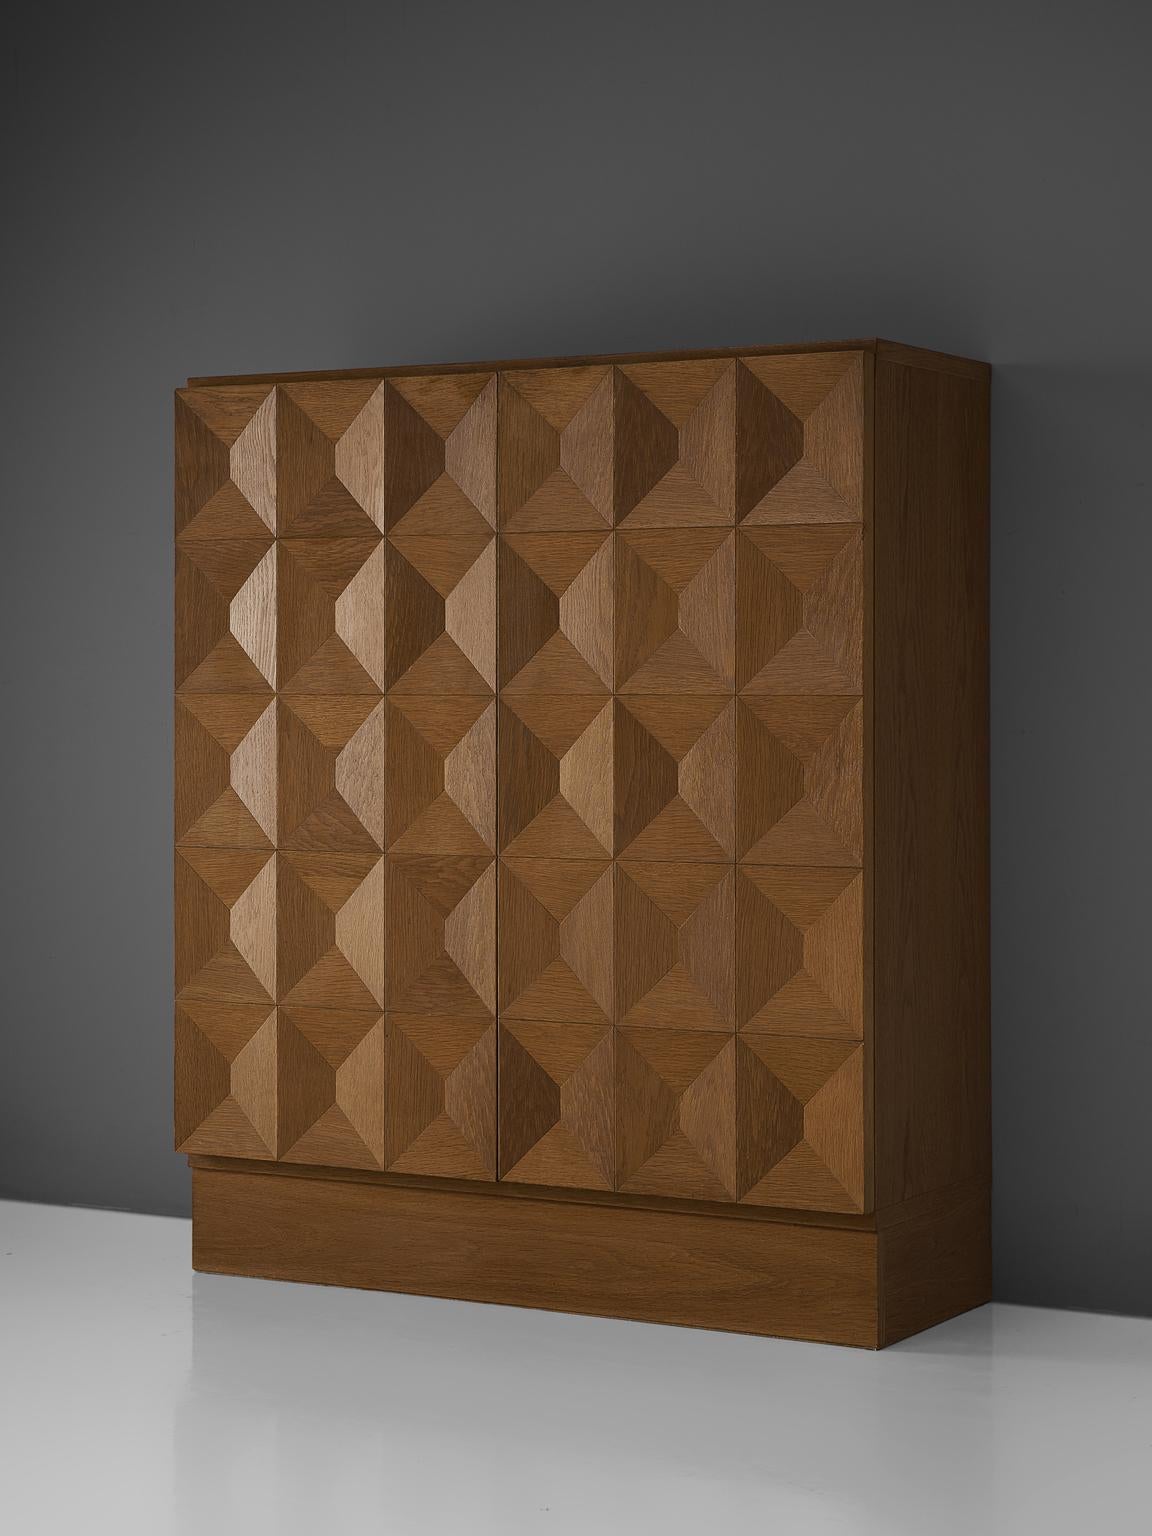 Brutalist cabinet, oak, Europe, 1970s. 

This cabinet with graphical oak cabinet. Two-door panel, each feature an exceptional three-dimensional large pattern. The continuous pattern gives this cabinet a very strong expression, emphasized by the